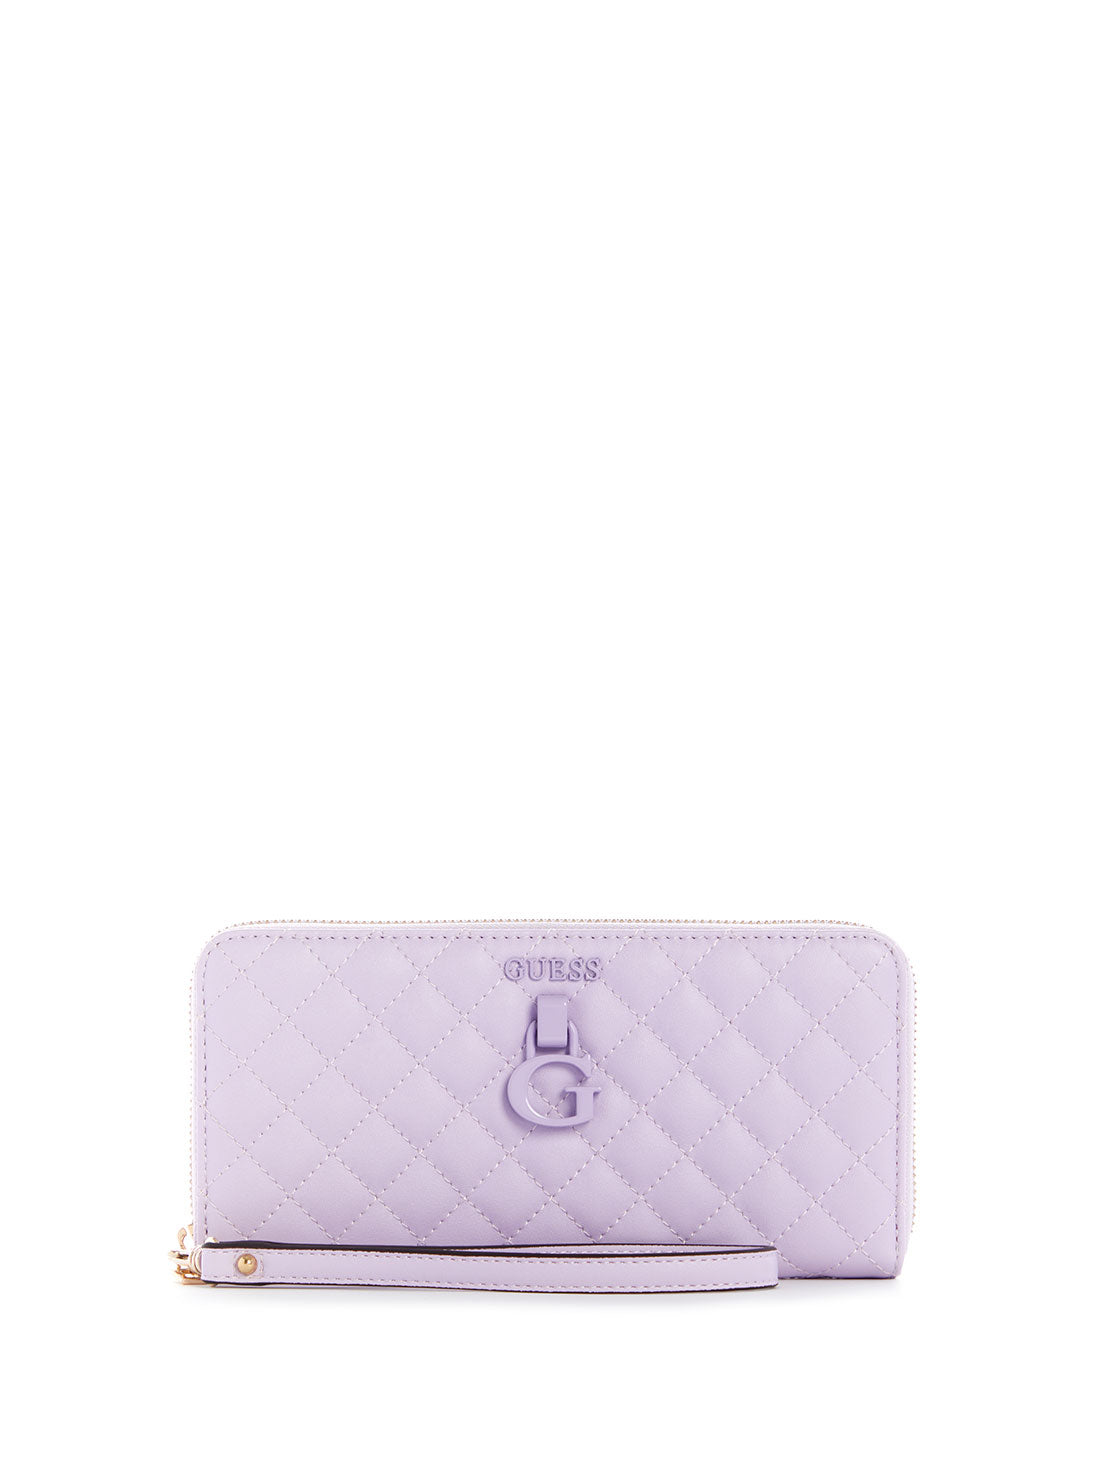 Lilac Rue Rose Large Wallet